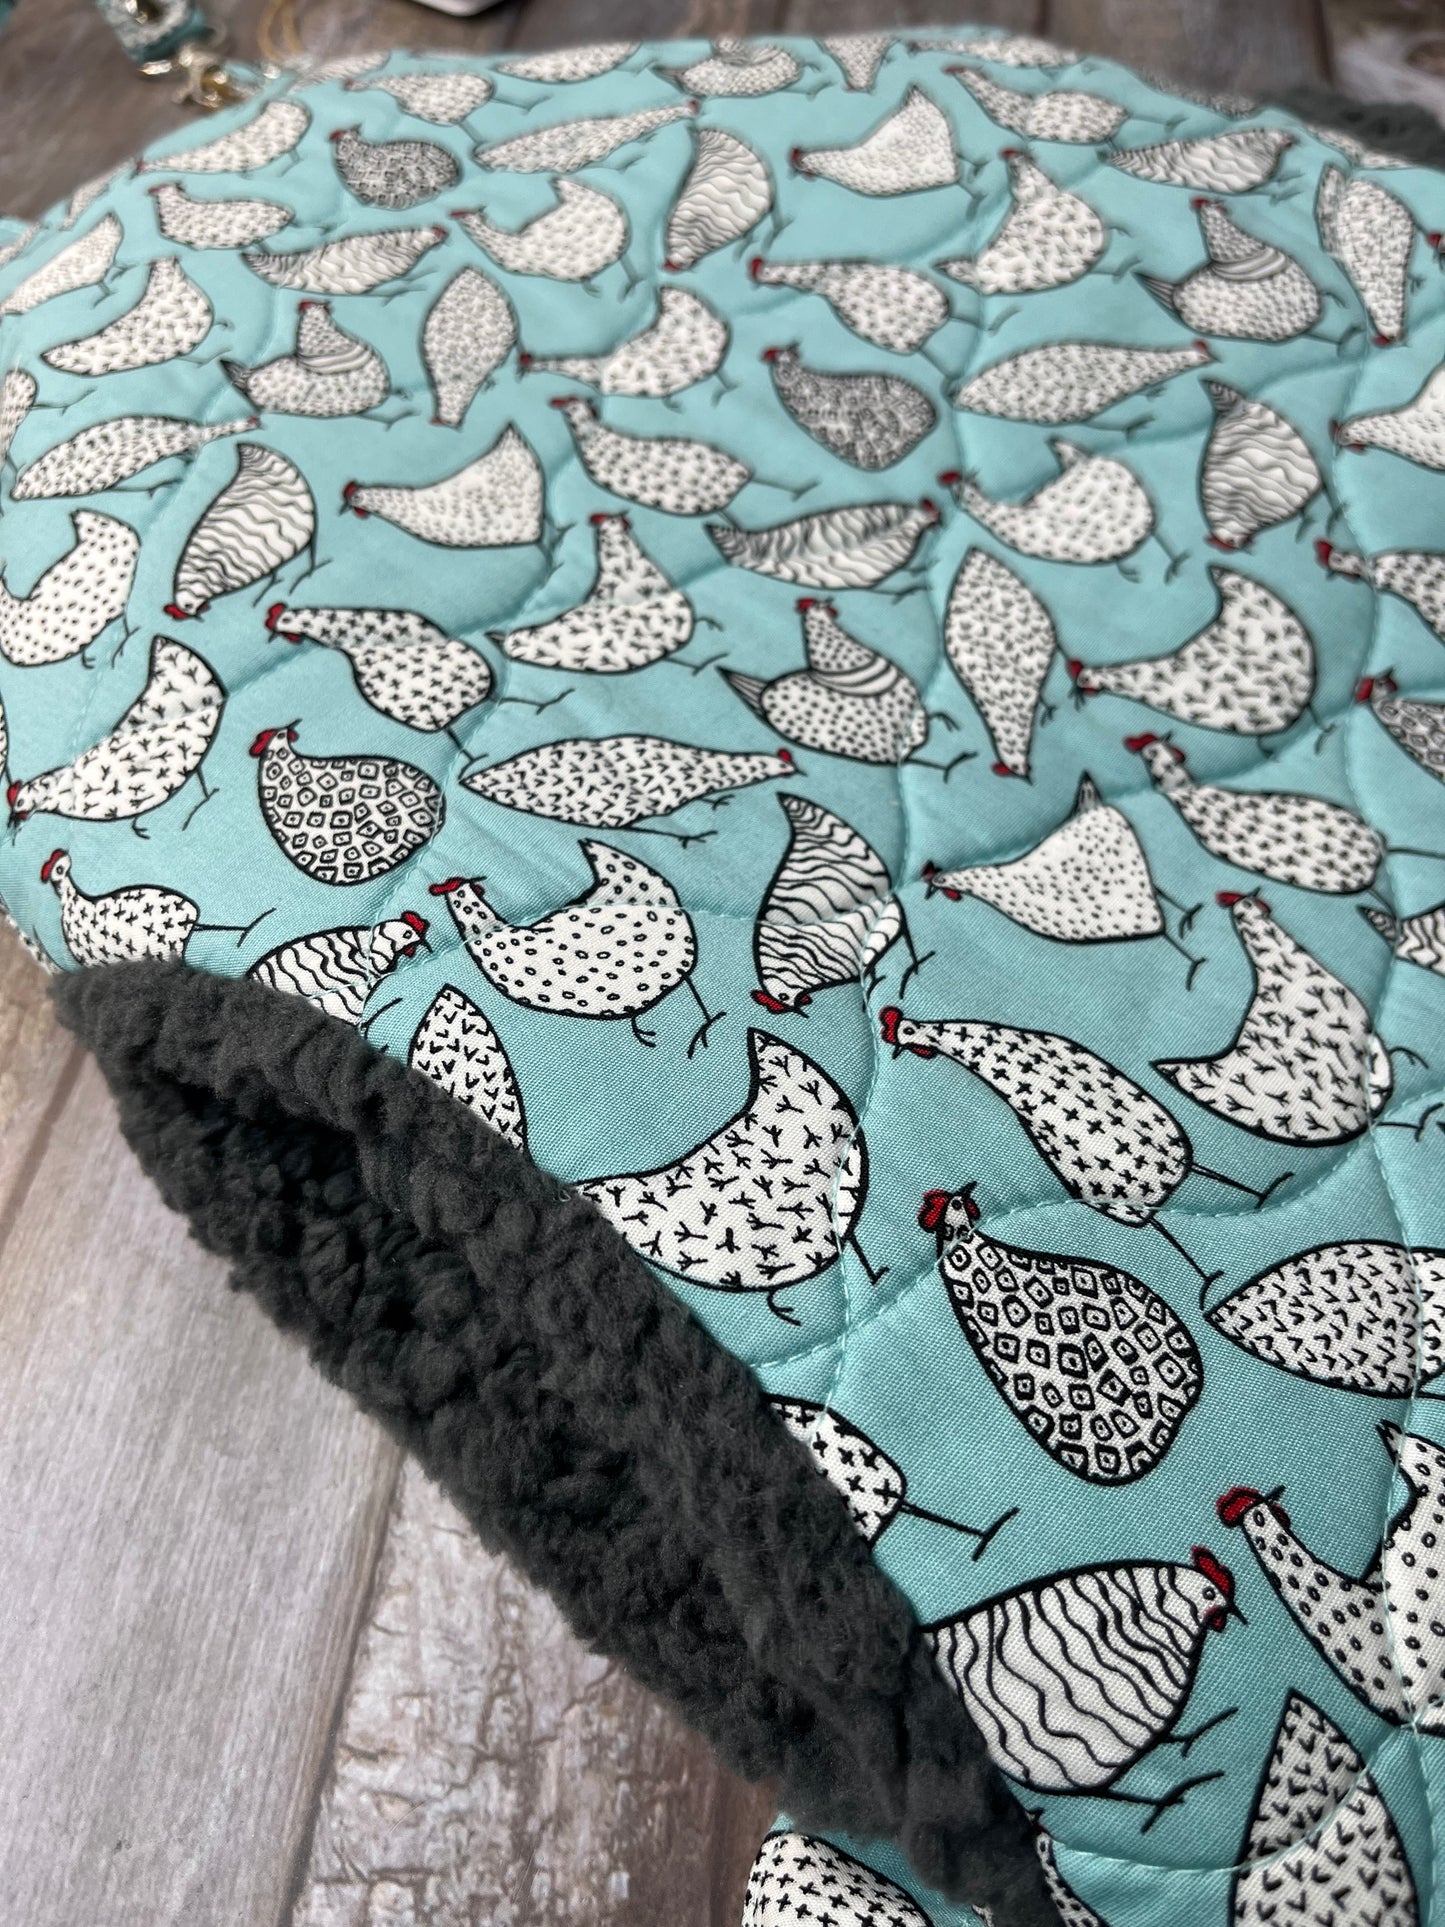 Wearable Hot Water Bottle Cover - Mint Chickens 🐓 - Uphouse Crafts